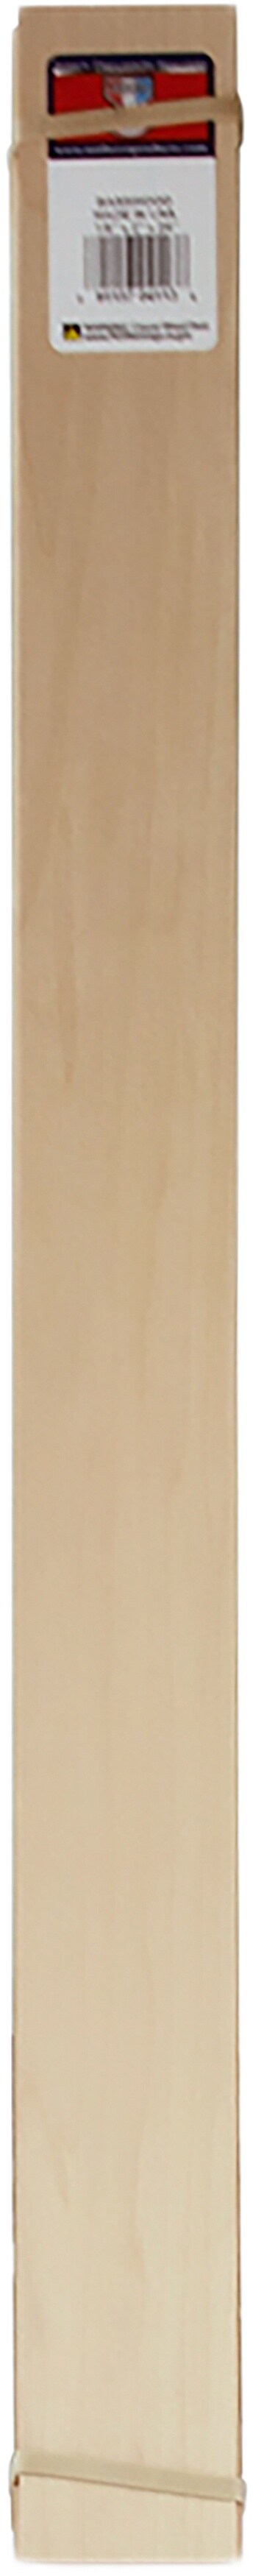 Midwest Products Basswood Sheet